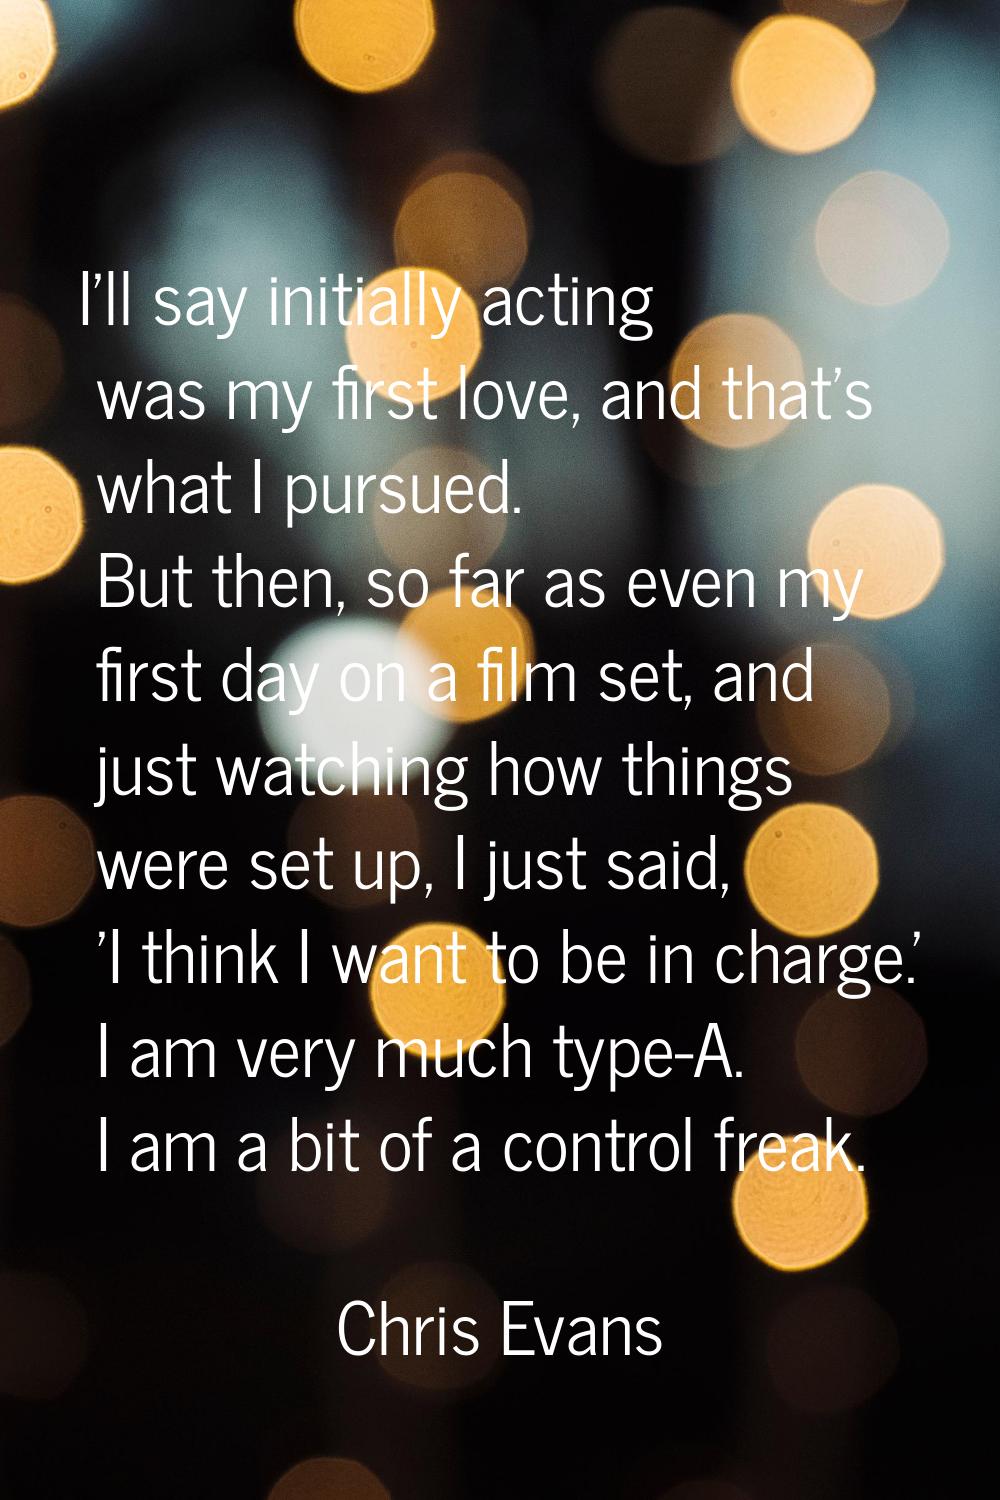 I'll say initially acting was my first love, and that's what I pursued. But then, so far as even my